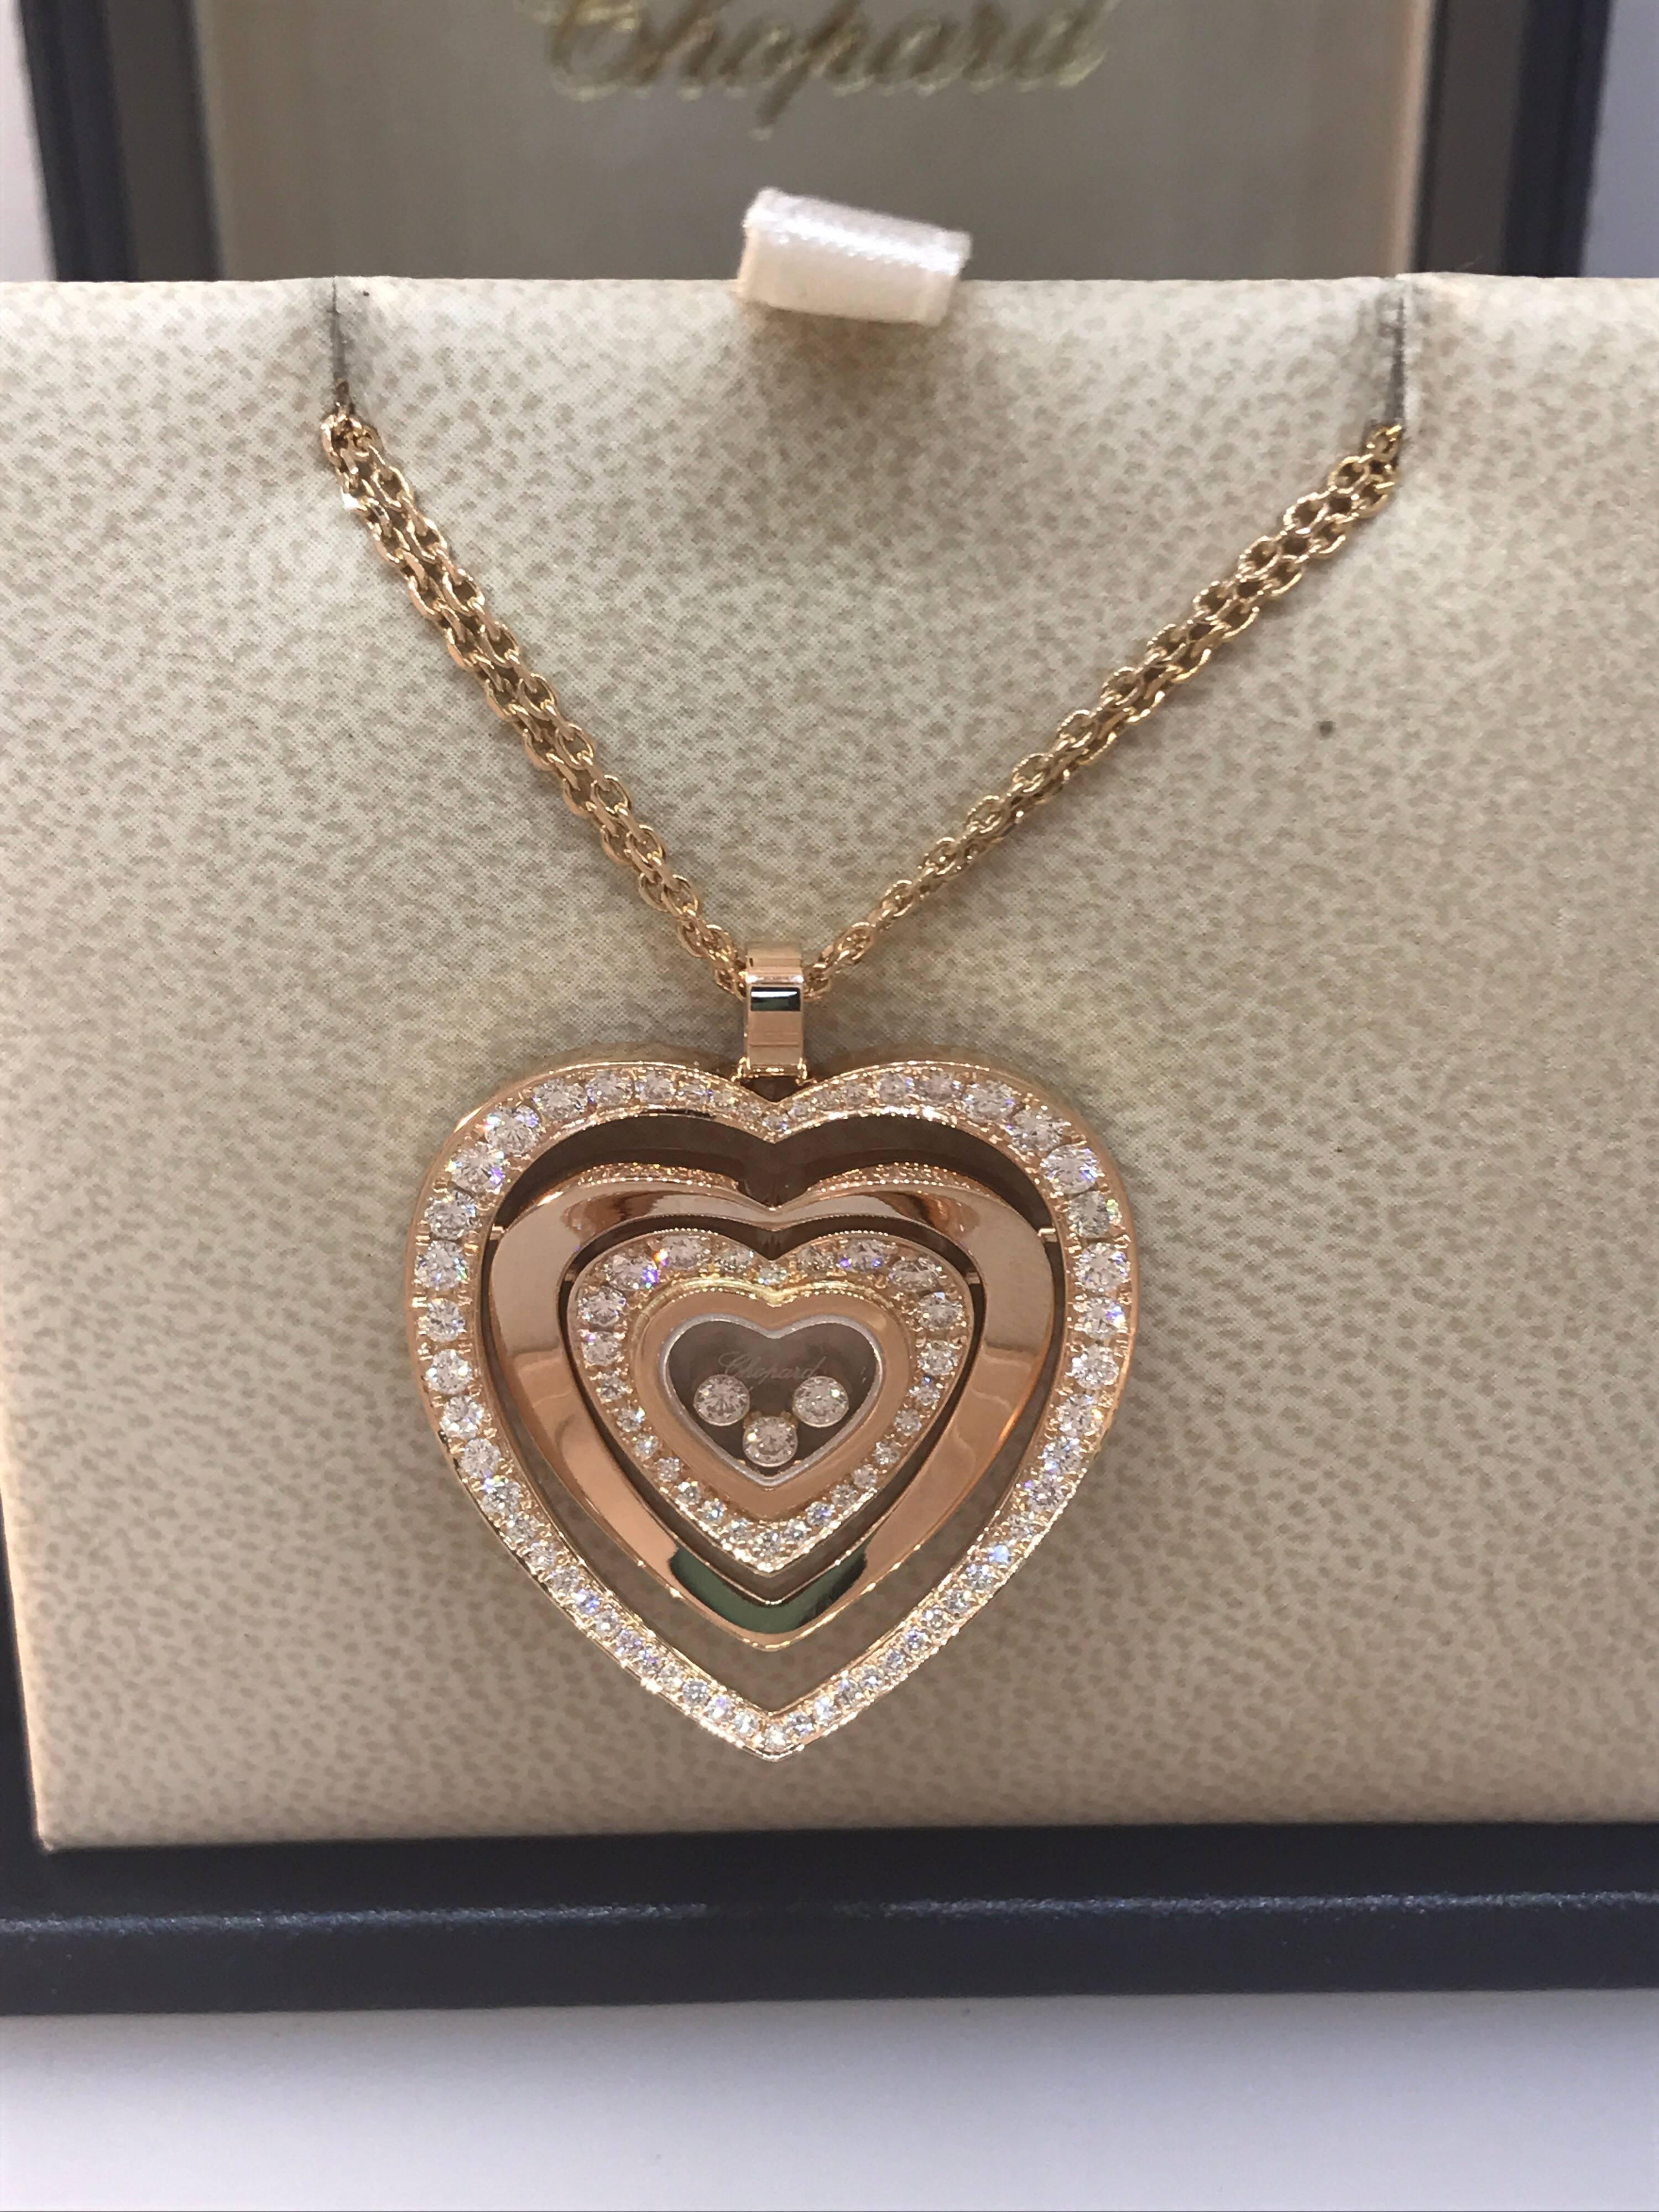 Chopard Happy Diamonds Heart Pendant / Necklace

Model Number: 79/7221-5002

100% Authentic

Brand New

Comes with original Chopard box, certificate of authenticity and warranty, and jewels manual

18 Karat Rose Gold (20.8gr)

80 Diamonds on the